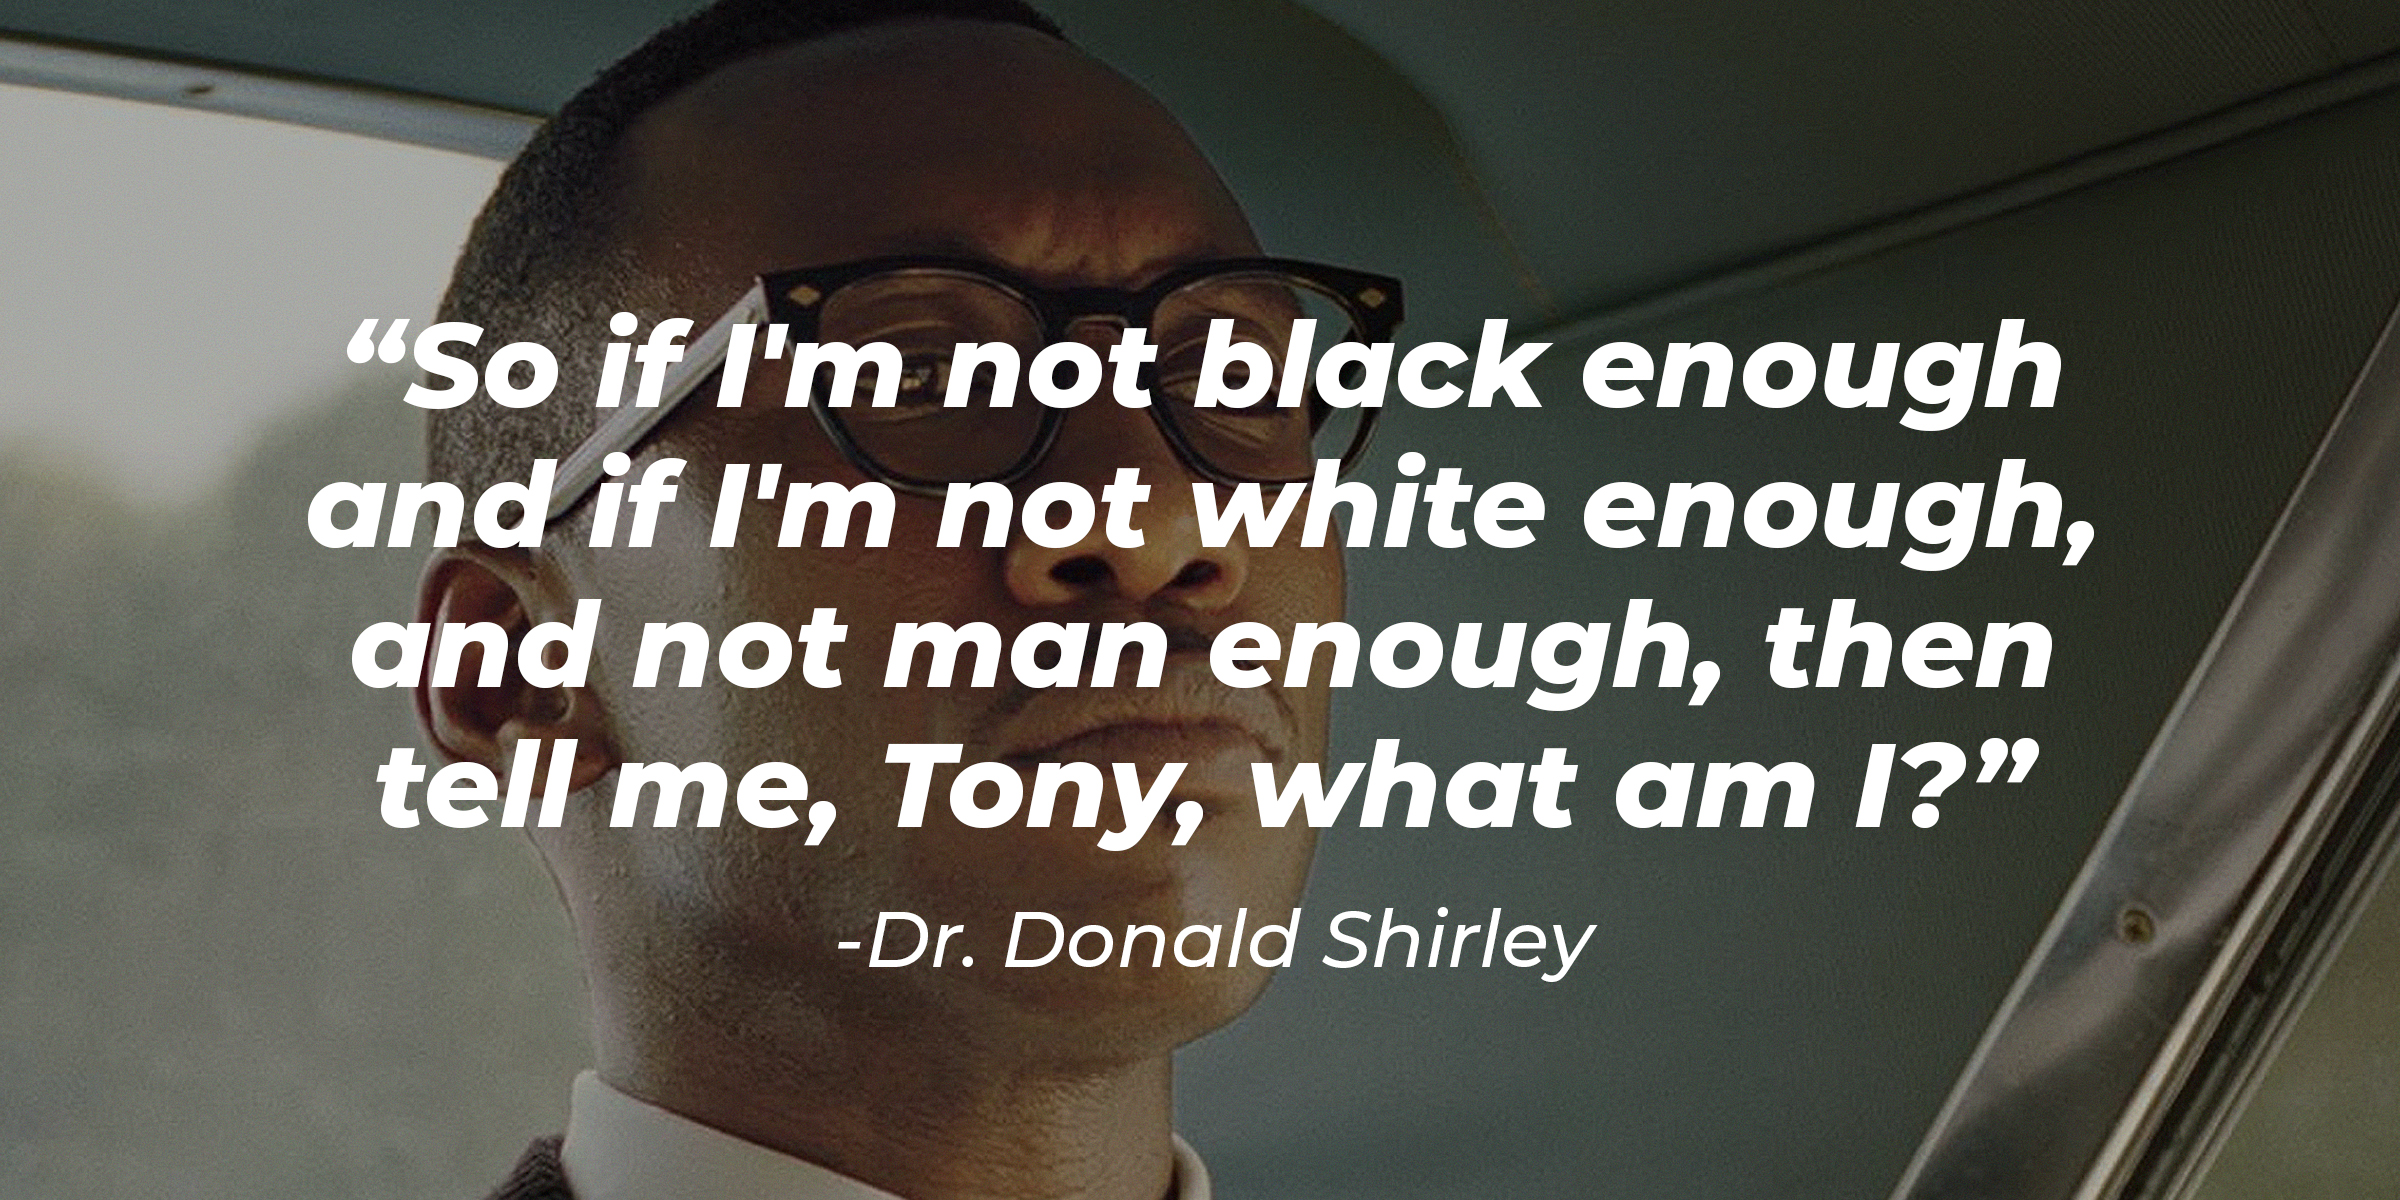 A photo of Dr. Donald Shirley with Dr. Donald Shirley's quote: “So if I'm not black enough and if I'm not white enough, and not man enough, then tell me, Tony, what am I?” | Source: facebook.com/Greenbookmovie